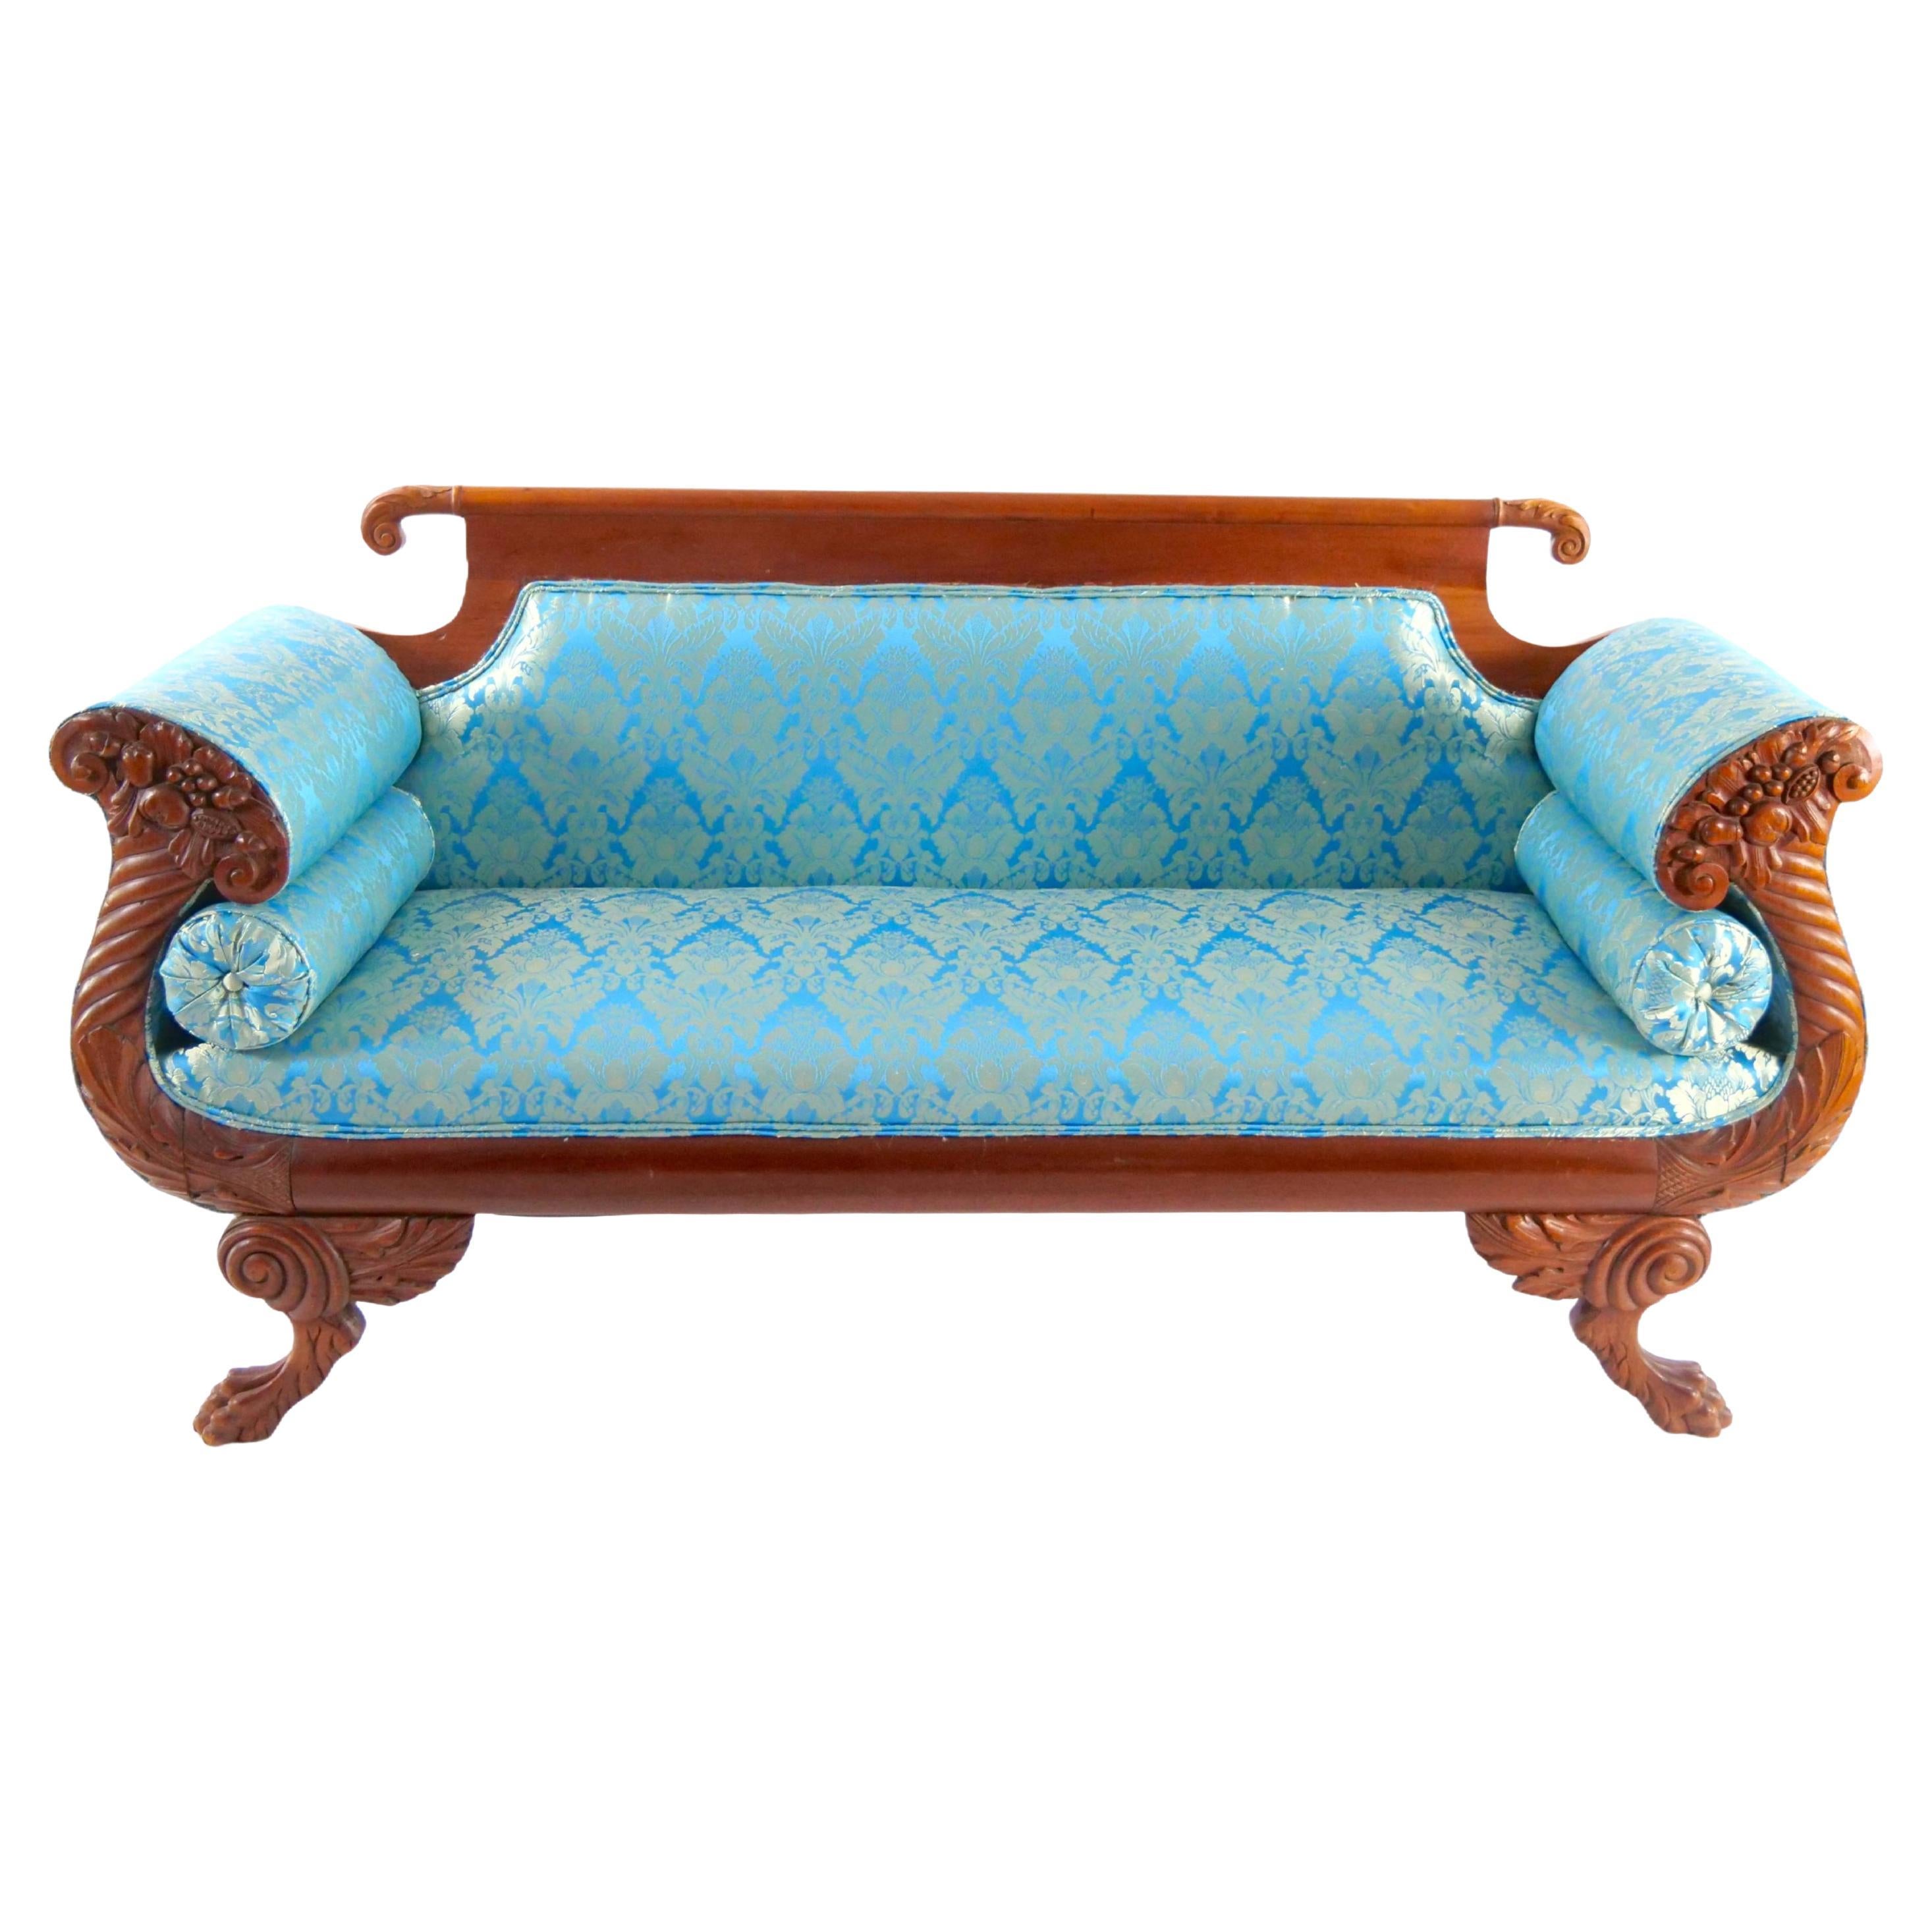 19th Century Mahogany Wood Framed Empire Style Upholstered Sofa For Sale